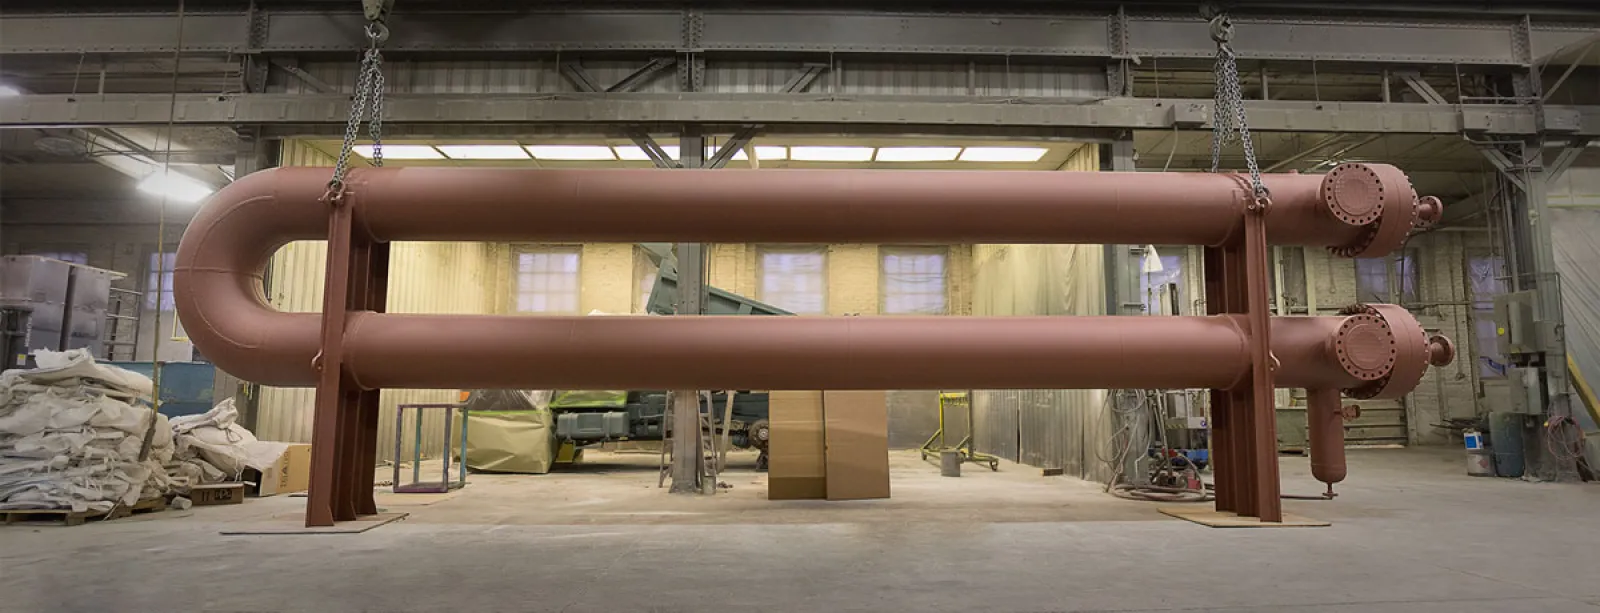 a large metal pipe in a warehouse